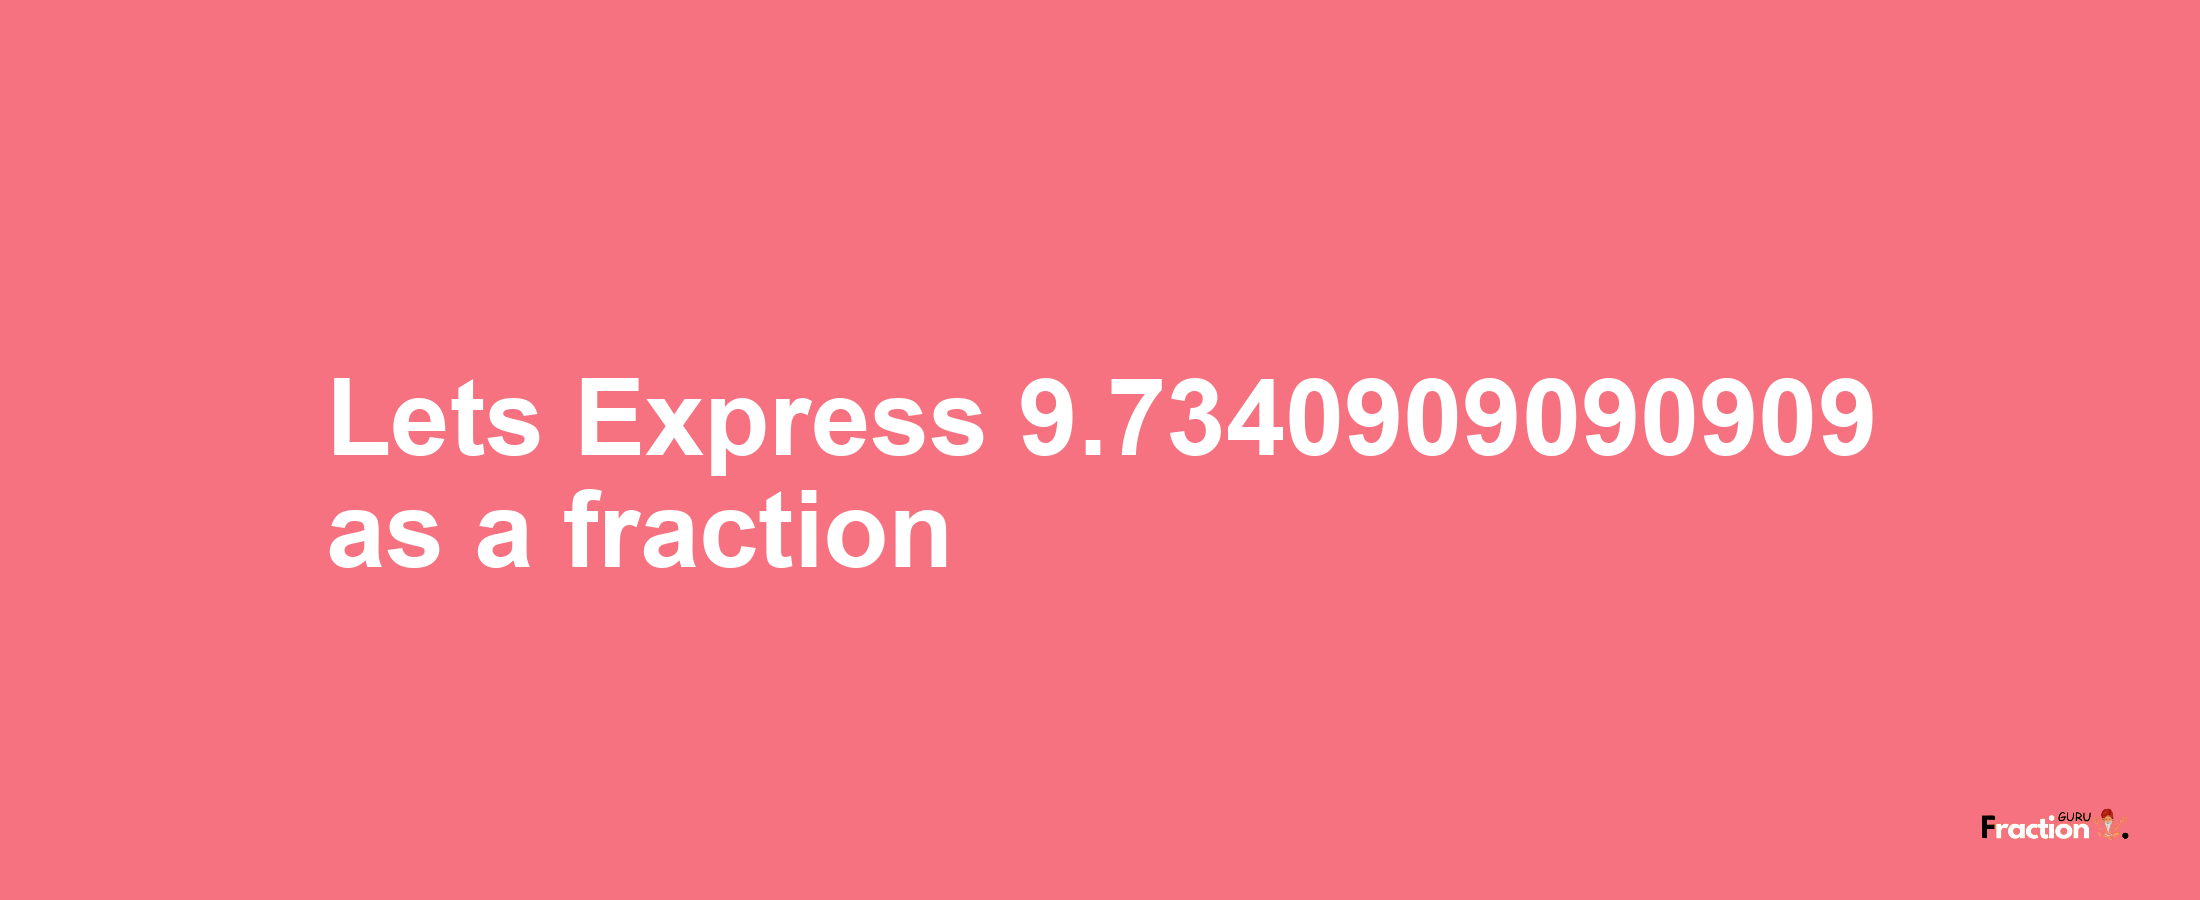 Lets Express 9.7340909090909 as afraction